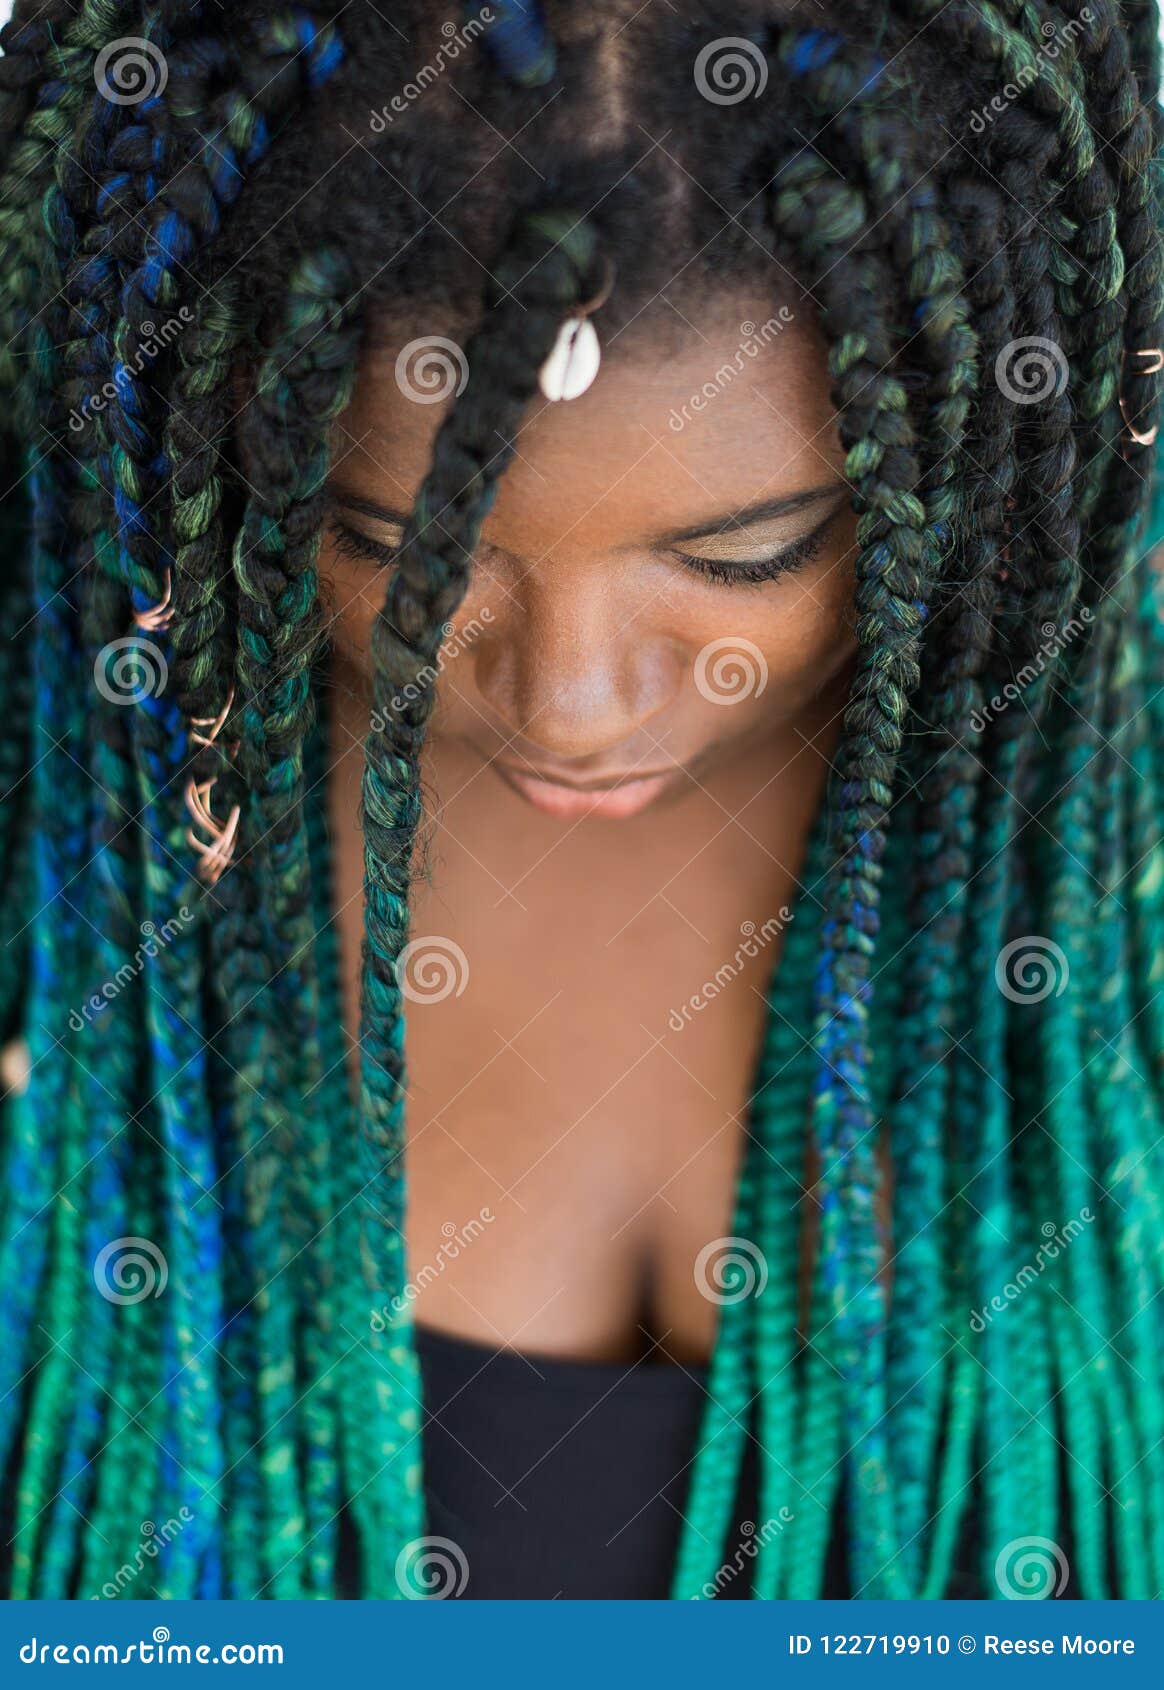 African American Woman With Beautiful Teal Green Blue Braids Stock Photo Image Of African Close 122719910